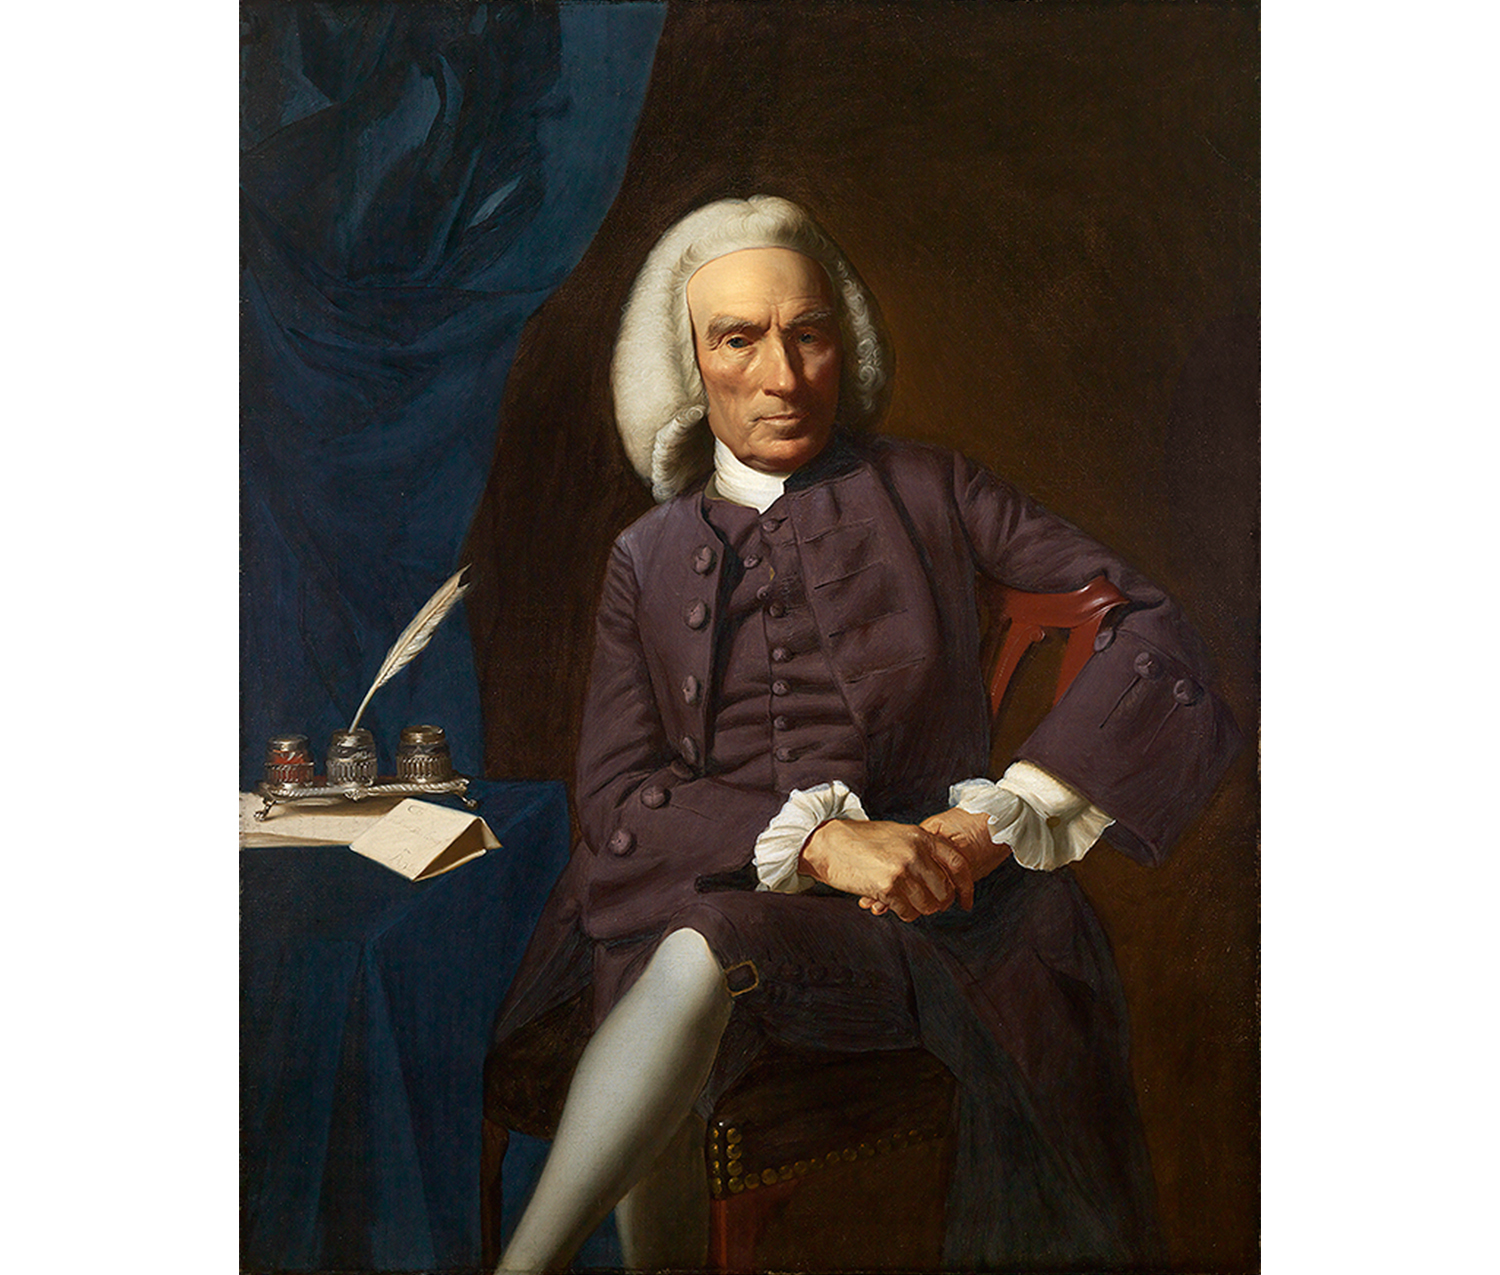 three quarter length portrait of an older man in long white wig, coat, vest, breeches and white stockings, seated legs crossed, hands together on proper left thigh, a small stand to his proper right holding paper, three ink wells and feather pen, curtain behind to his proper right